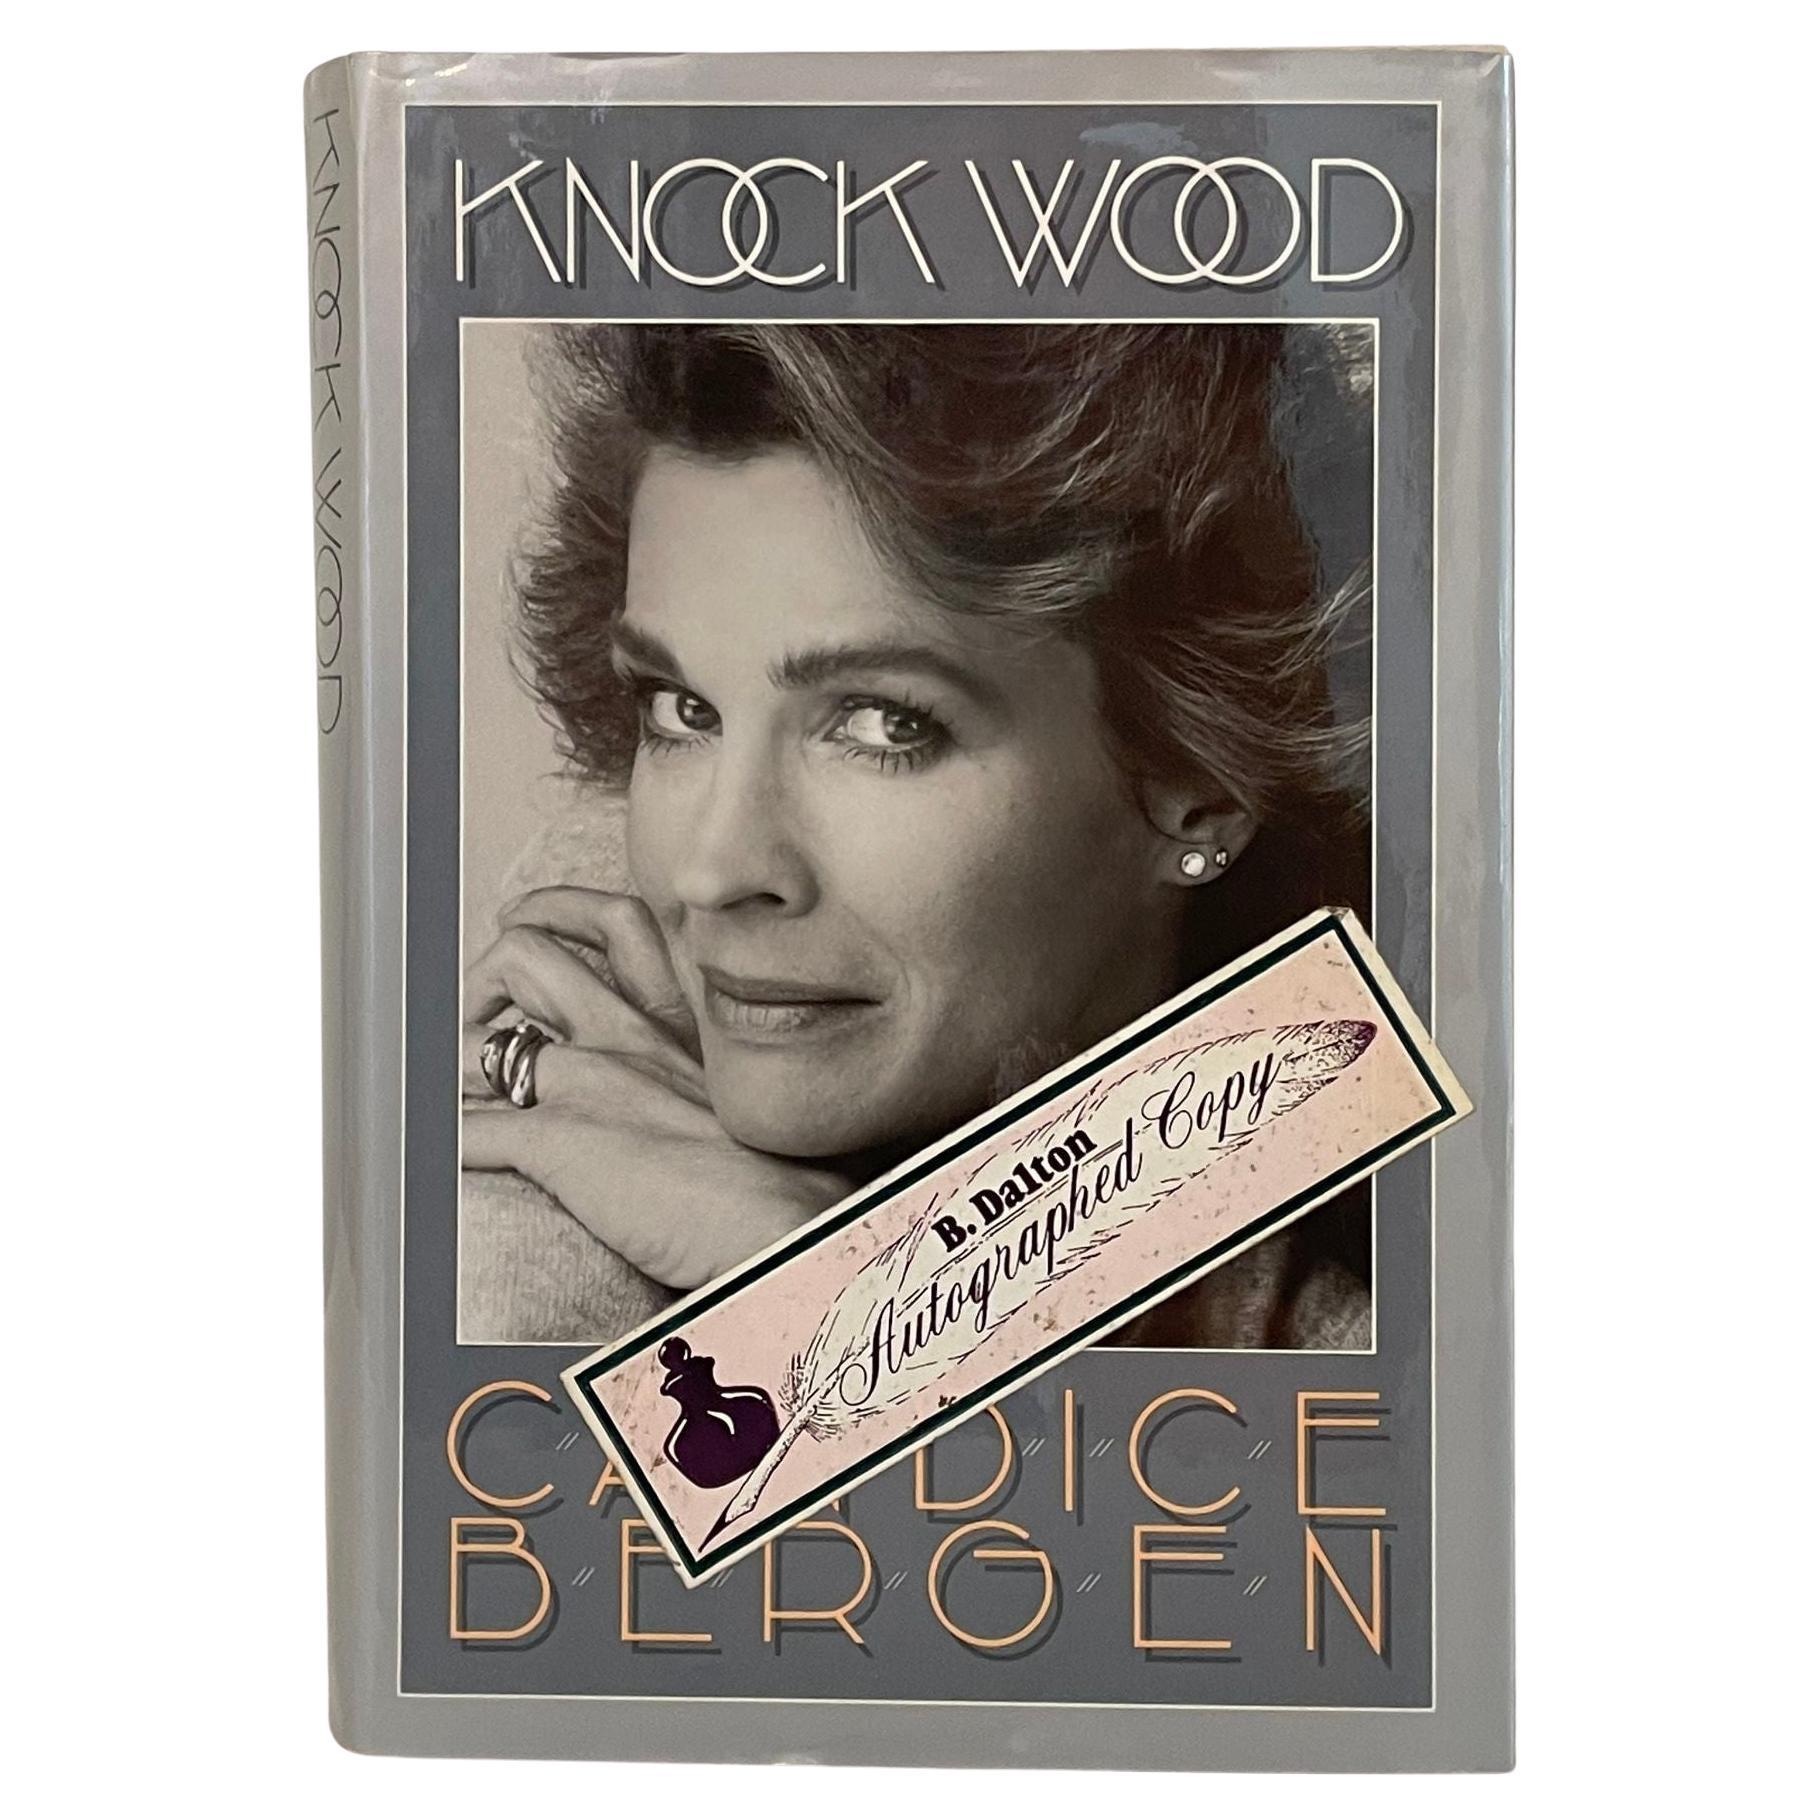 Knock Wood by Candice Bergen Signed Hardcover Book For Sale